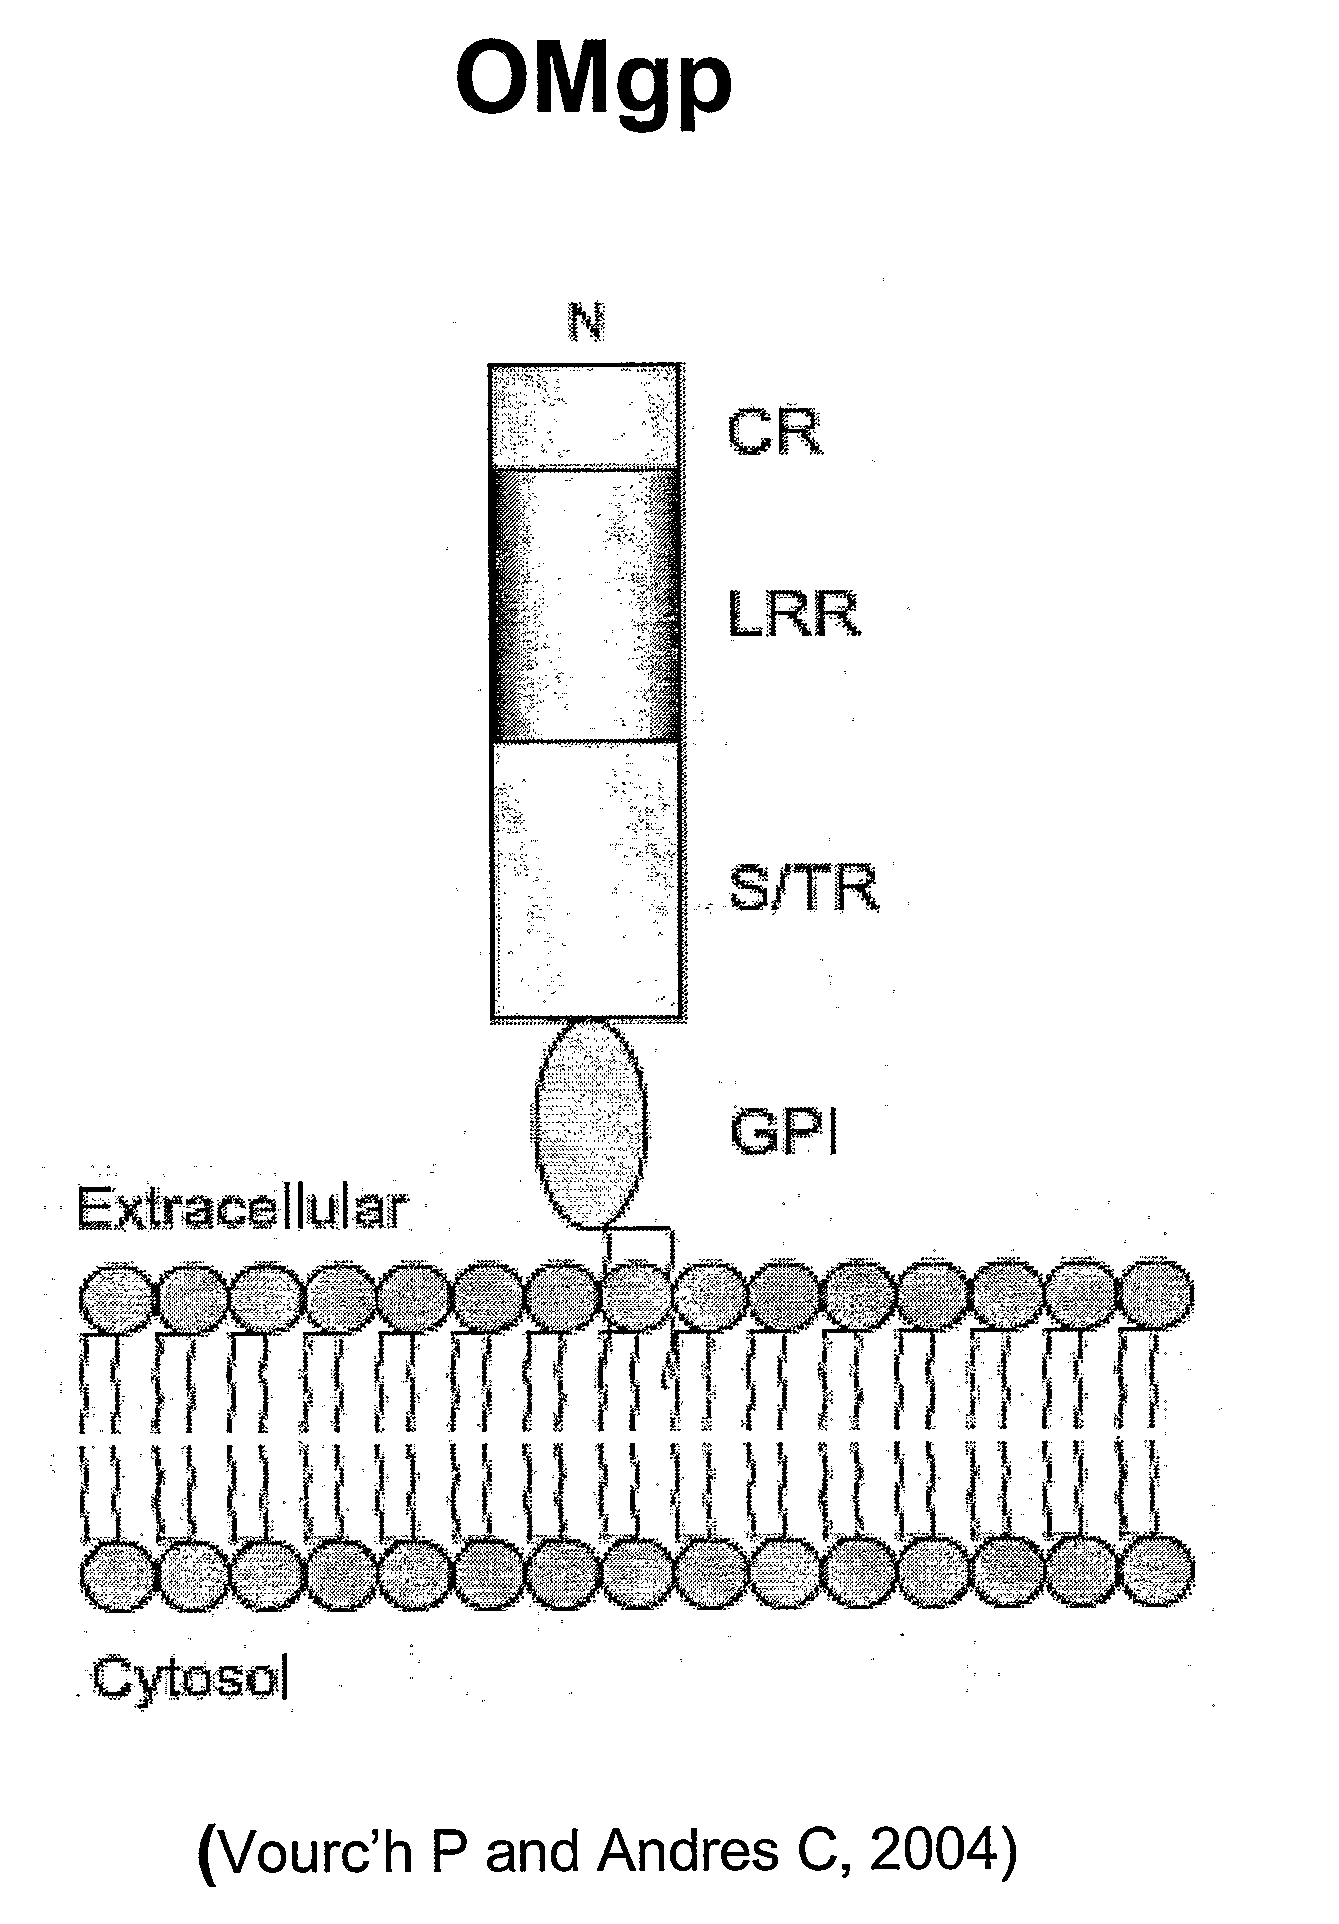 Oligodendrocyte-Myelin Glycoprotein Compositions and Methods of Use Thereof